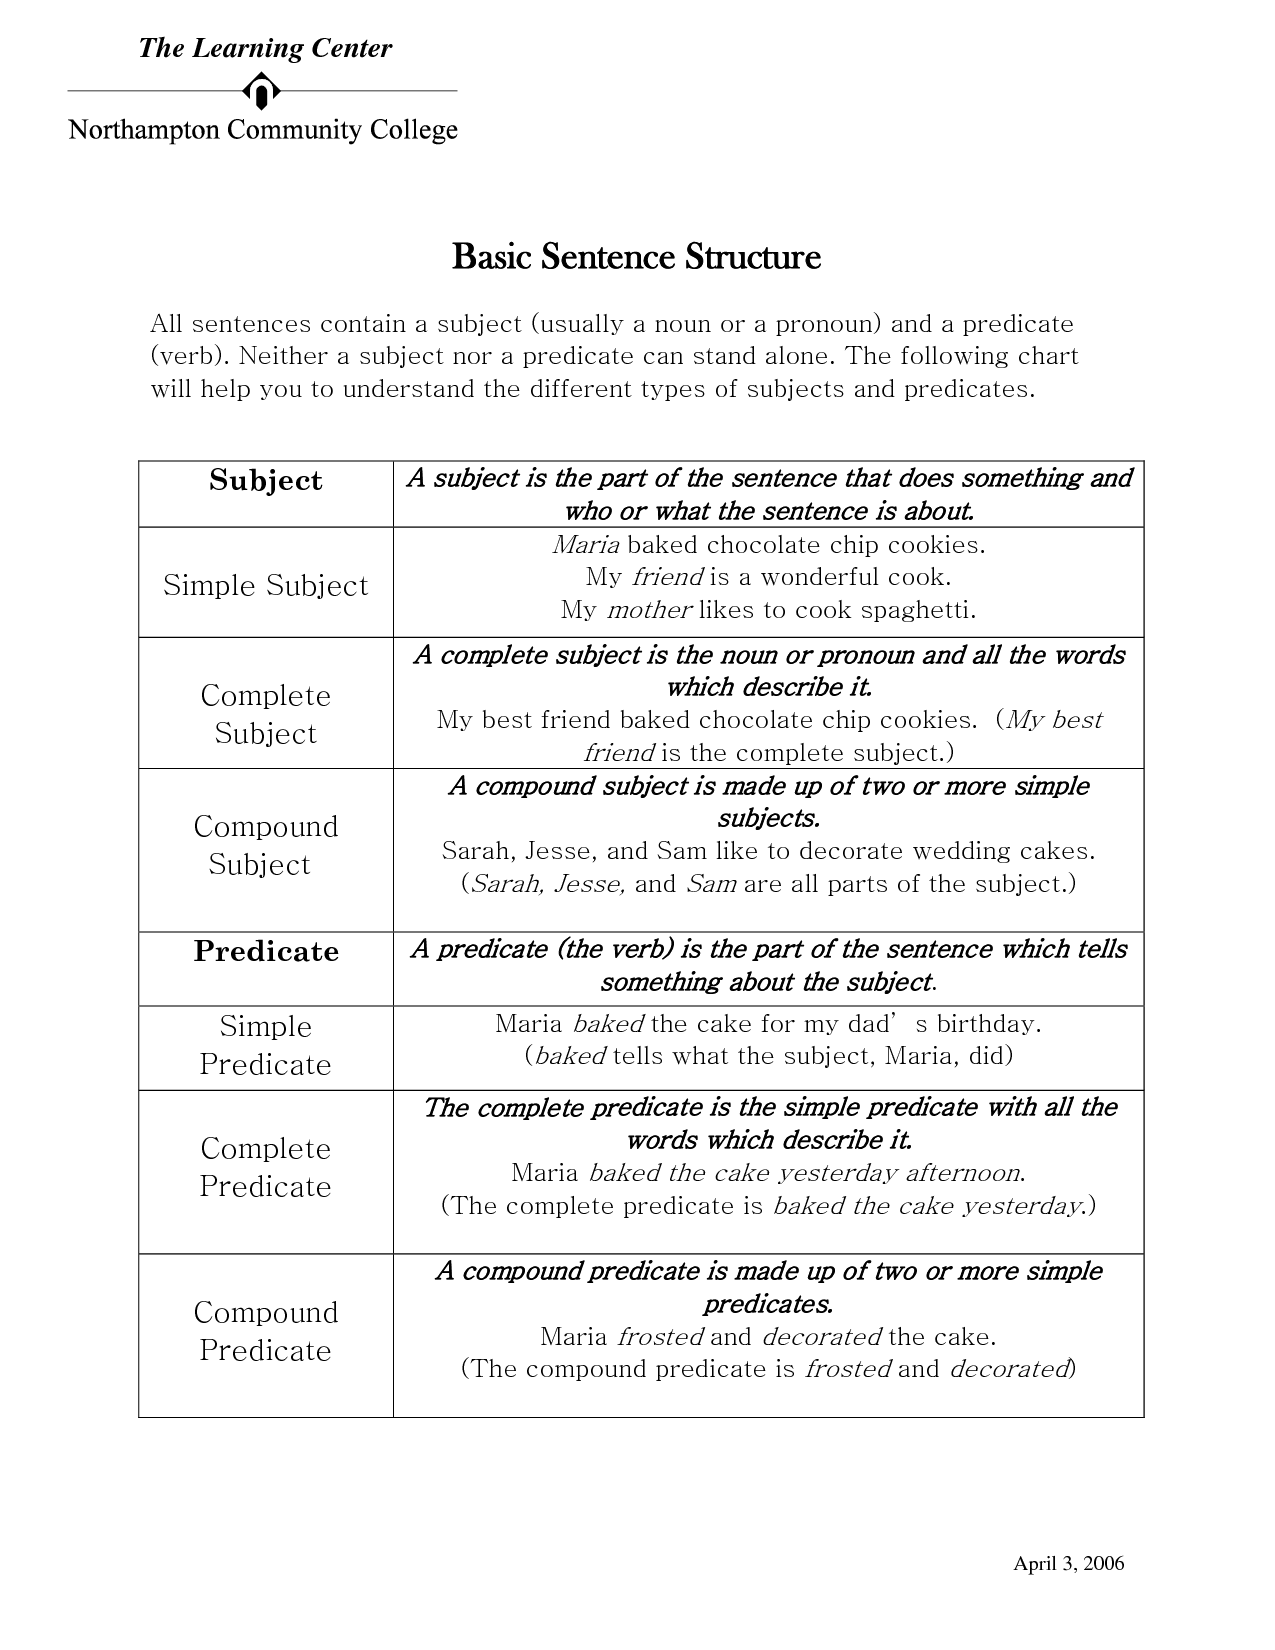 15-best-images-of-basic-sentence-structure-worksheets-printable-sentence-structure-worksheets